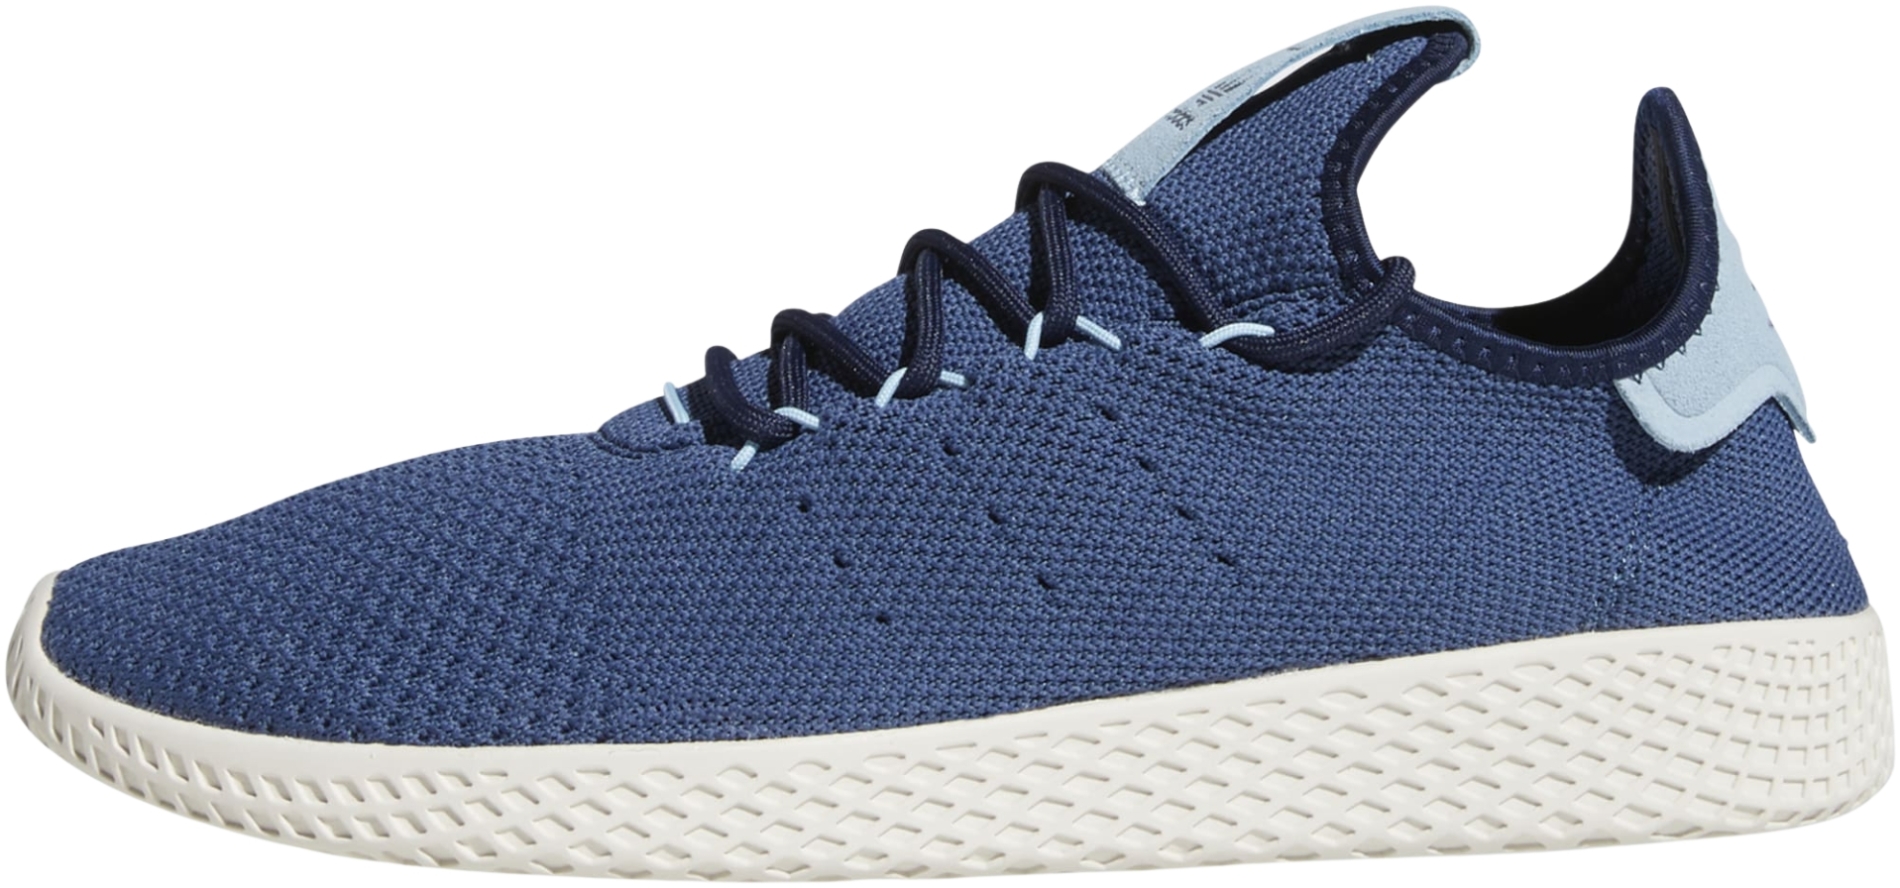 Williams Tennis Hu Review, Facts, Comparison